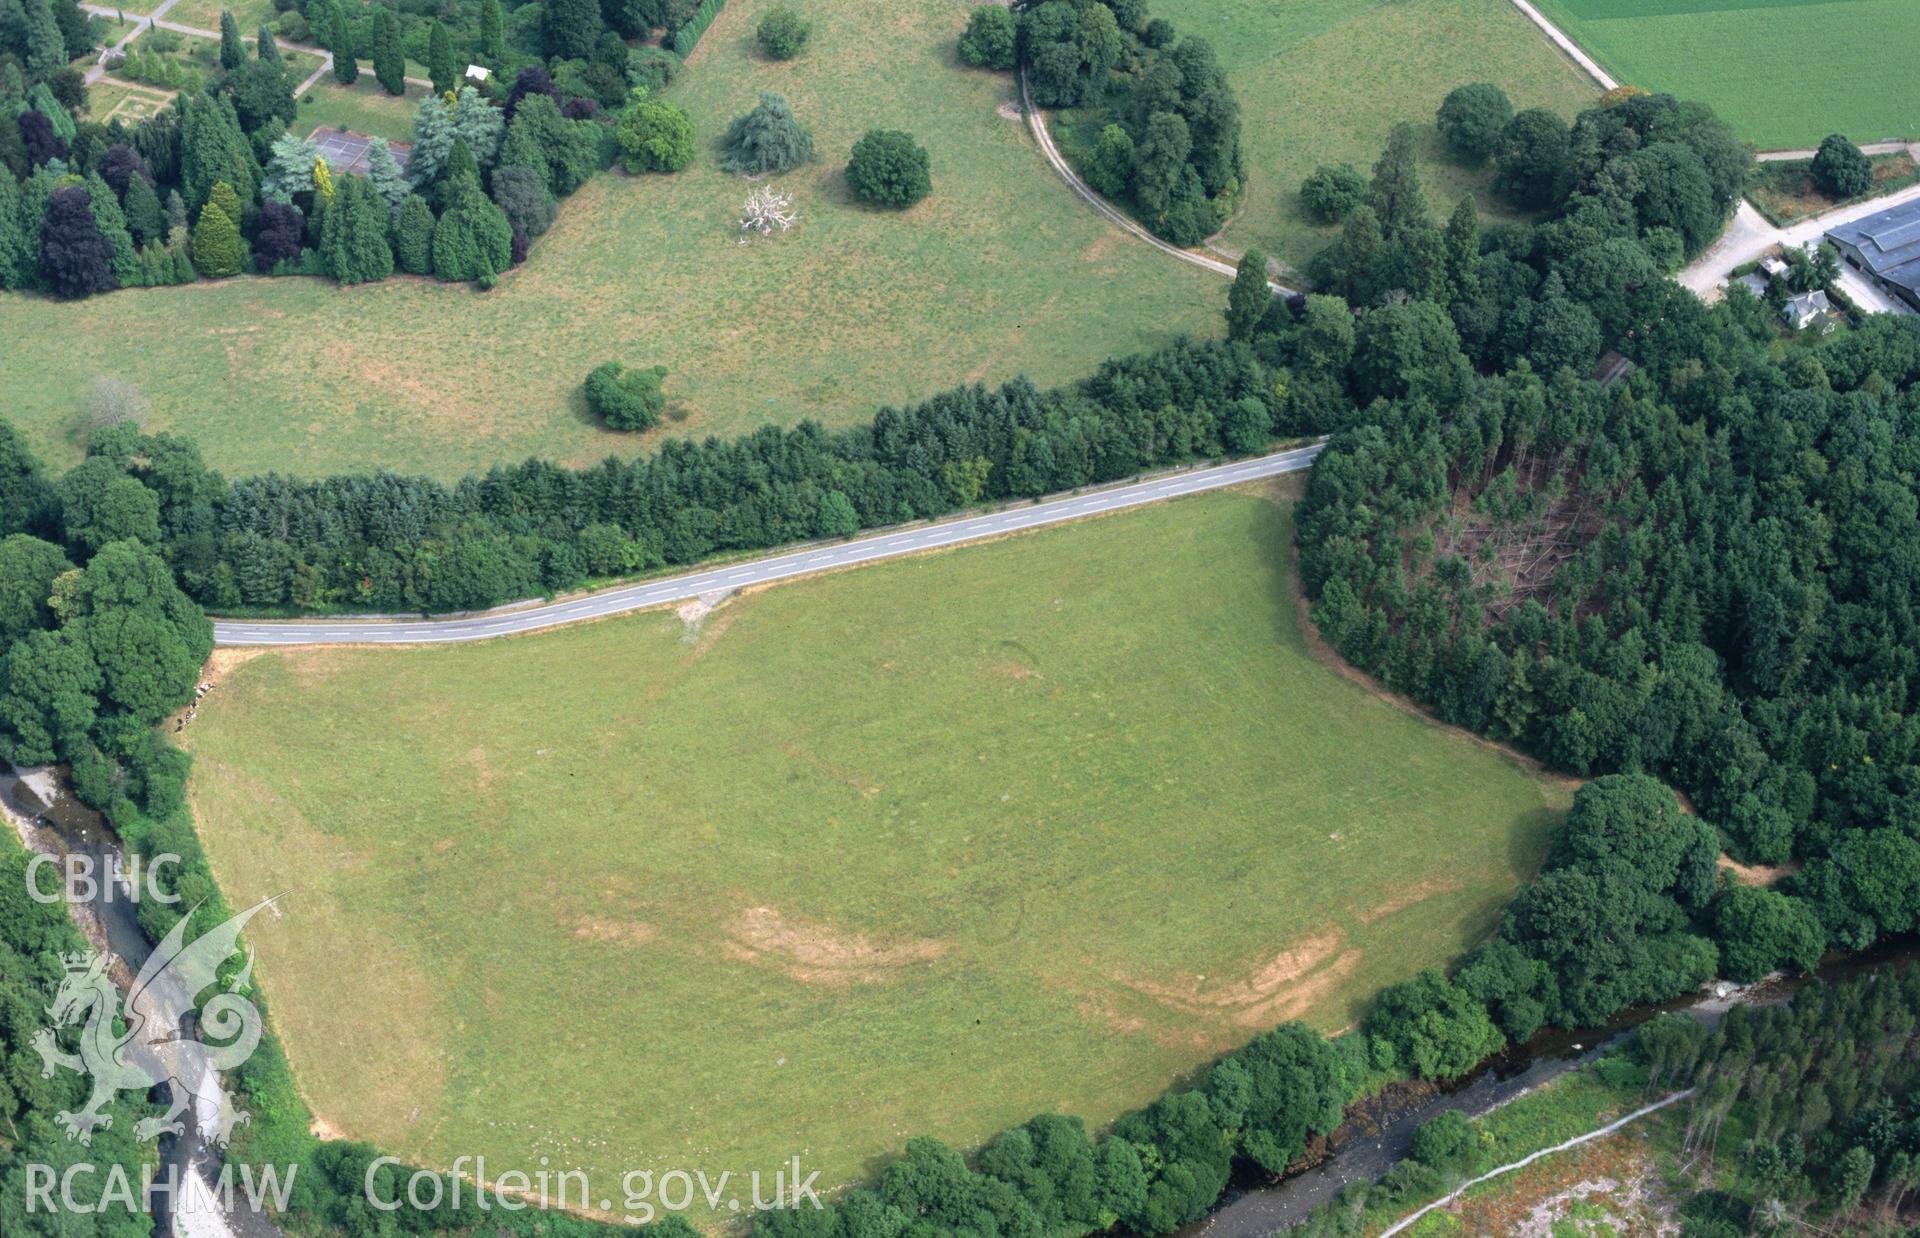 Slide of RCAHMW colour oblique aerial photograph of Trawsgoed Roman Fort, taken by T.G. Driver, 2/8/1999.